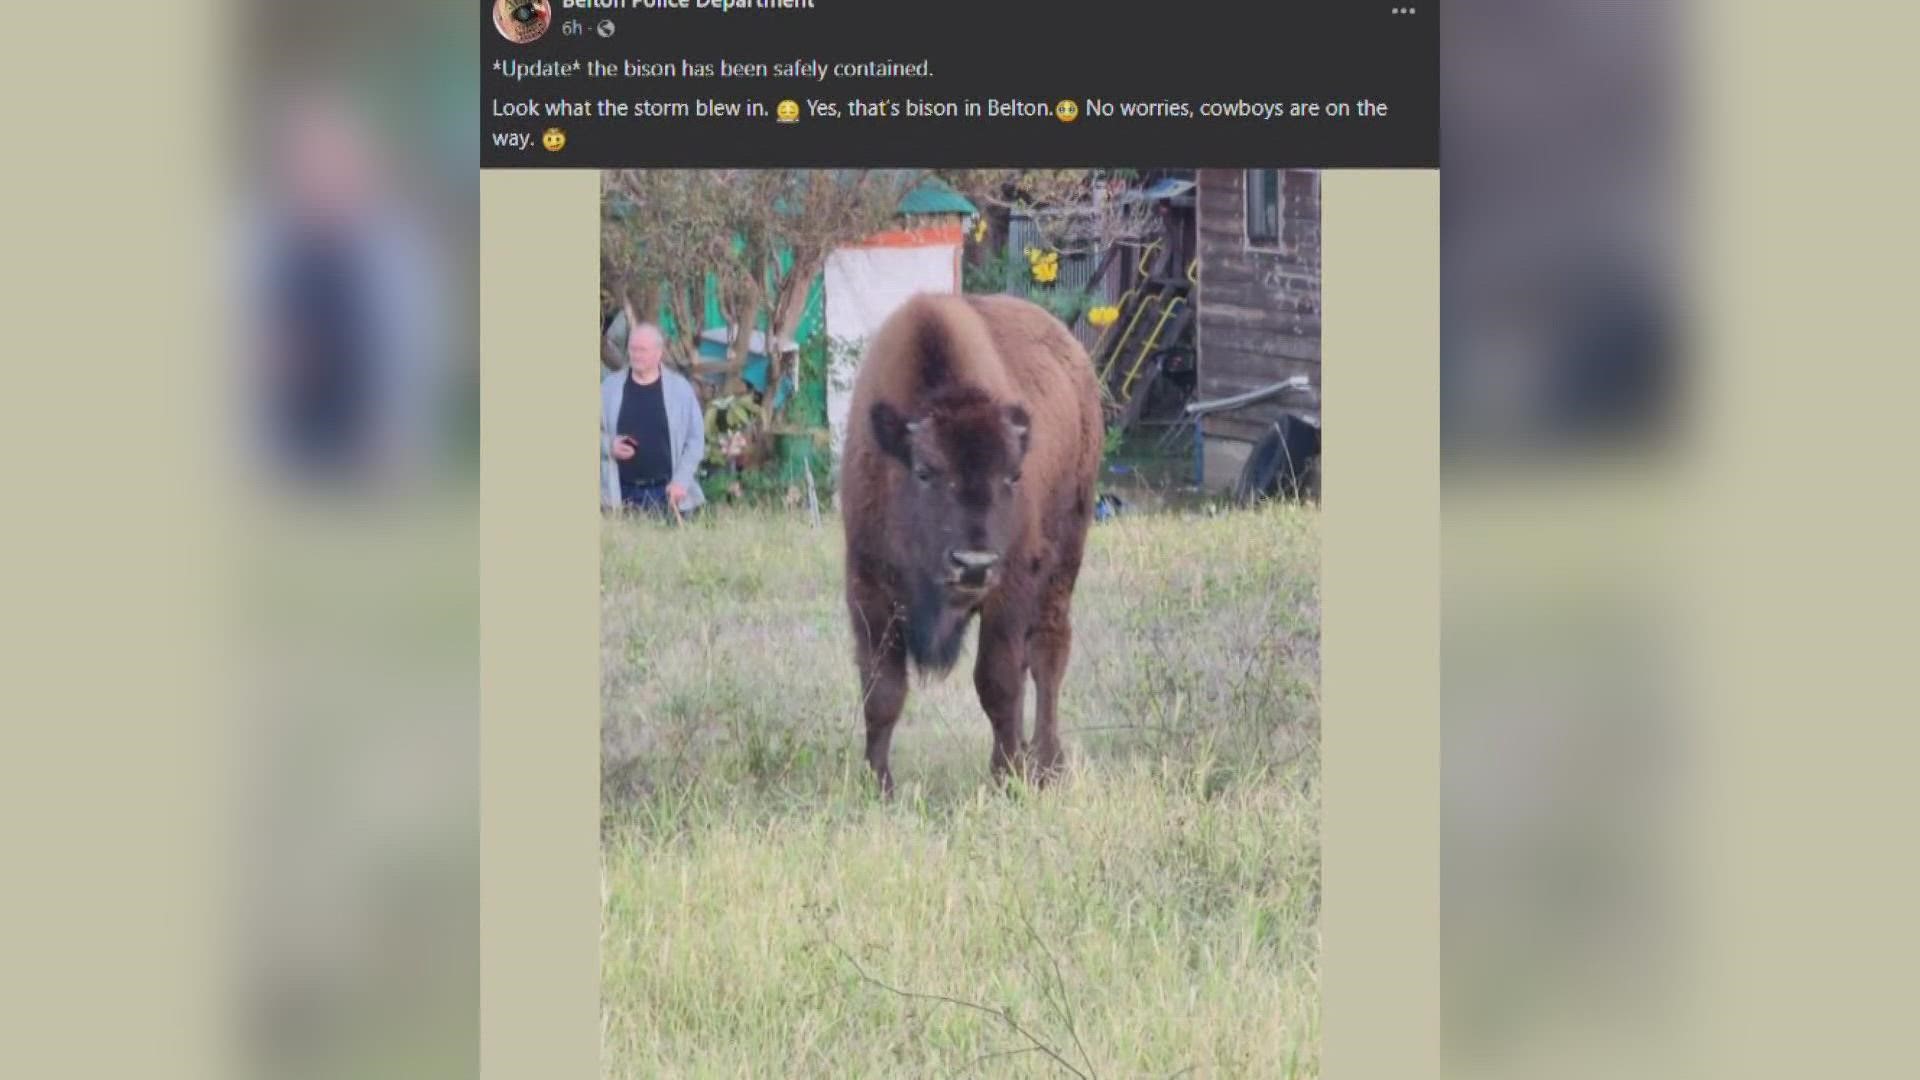 Police and local cowboys were able to safely capture the bison and return it to the veterinarian.